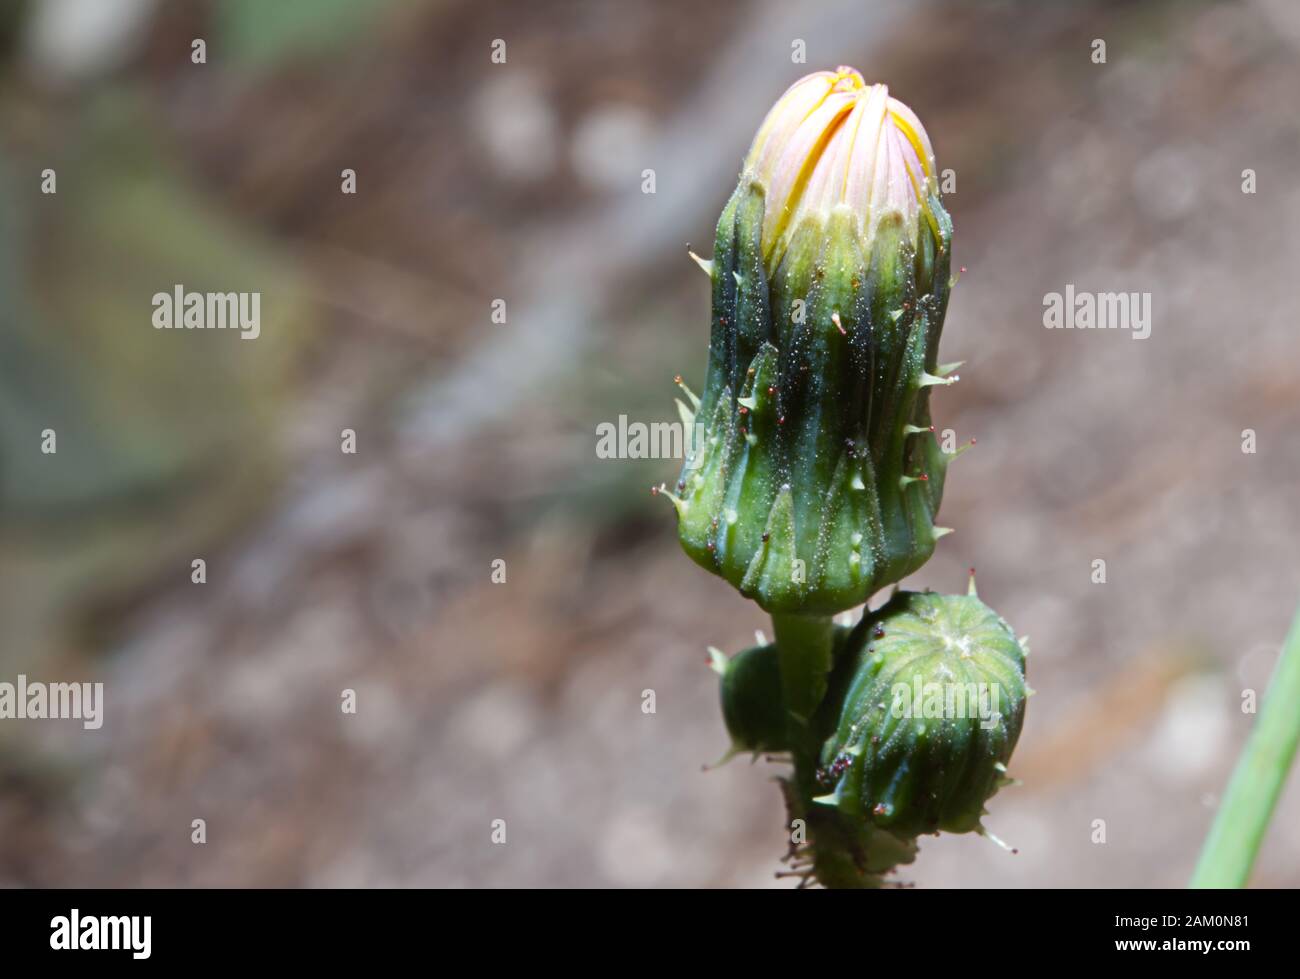 Closeup of a dandelion flower before it blooms Stock Photo